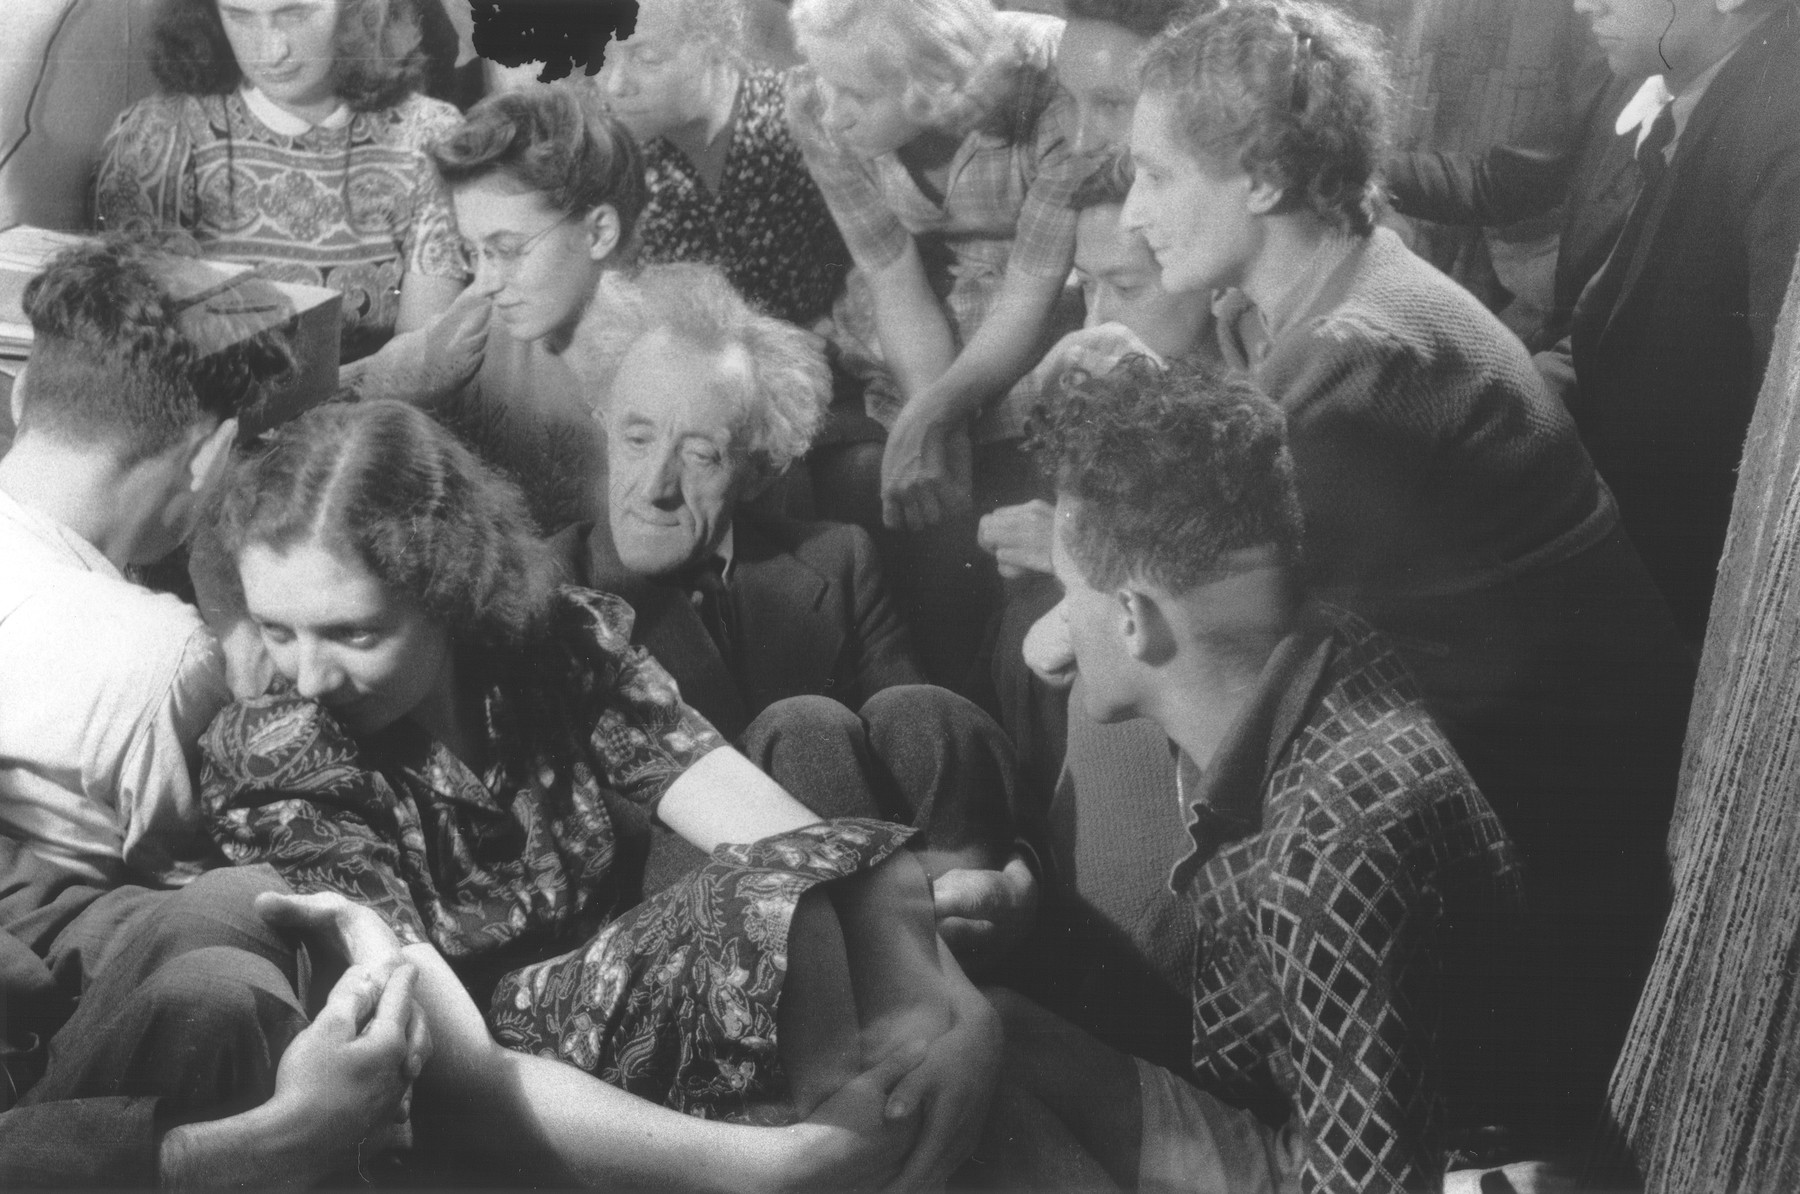 A group of Dutch resistance members and hidden Jews are crowded into a room [possibly to listen to a clandestine radio].

Those pictured include Hans Pos, Marie Scheres, Bep Klant, Phiep Vahrmayer, Rosette Aussen-Muscoviter, Oei Tjensit, Benno Aussen and Lizzy Pos.